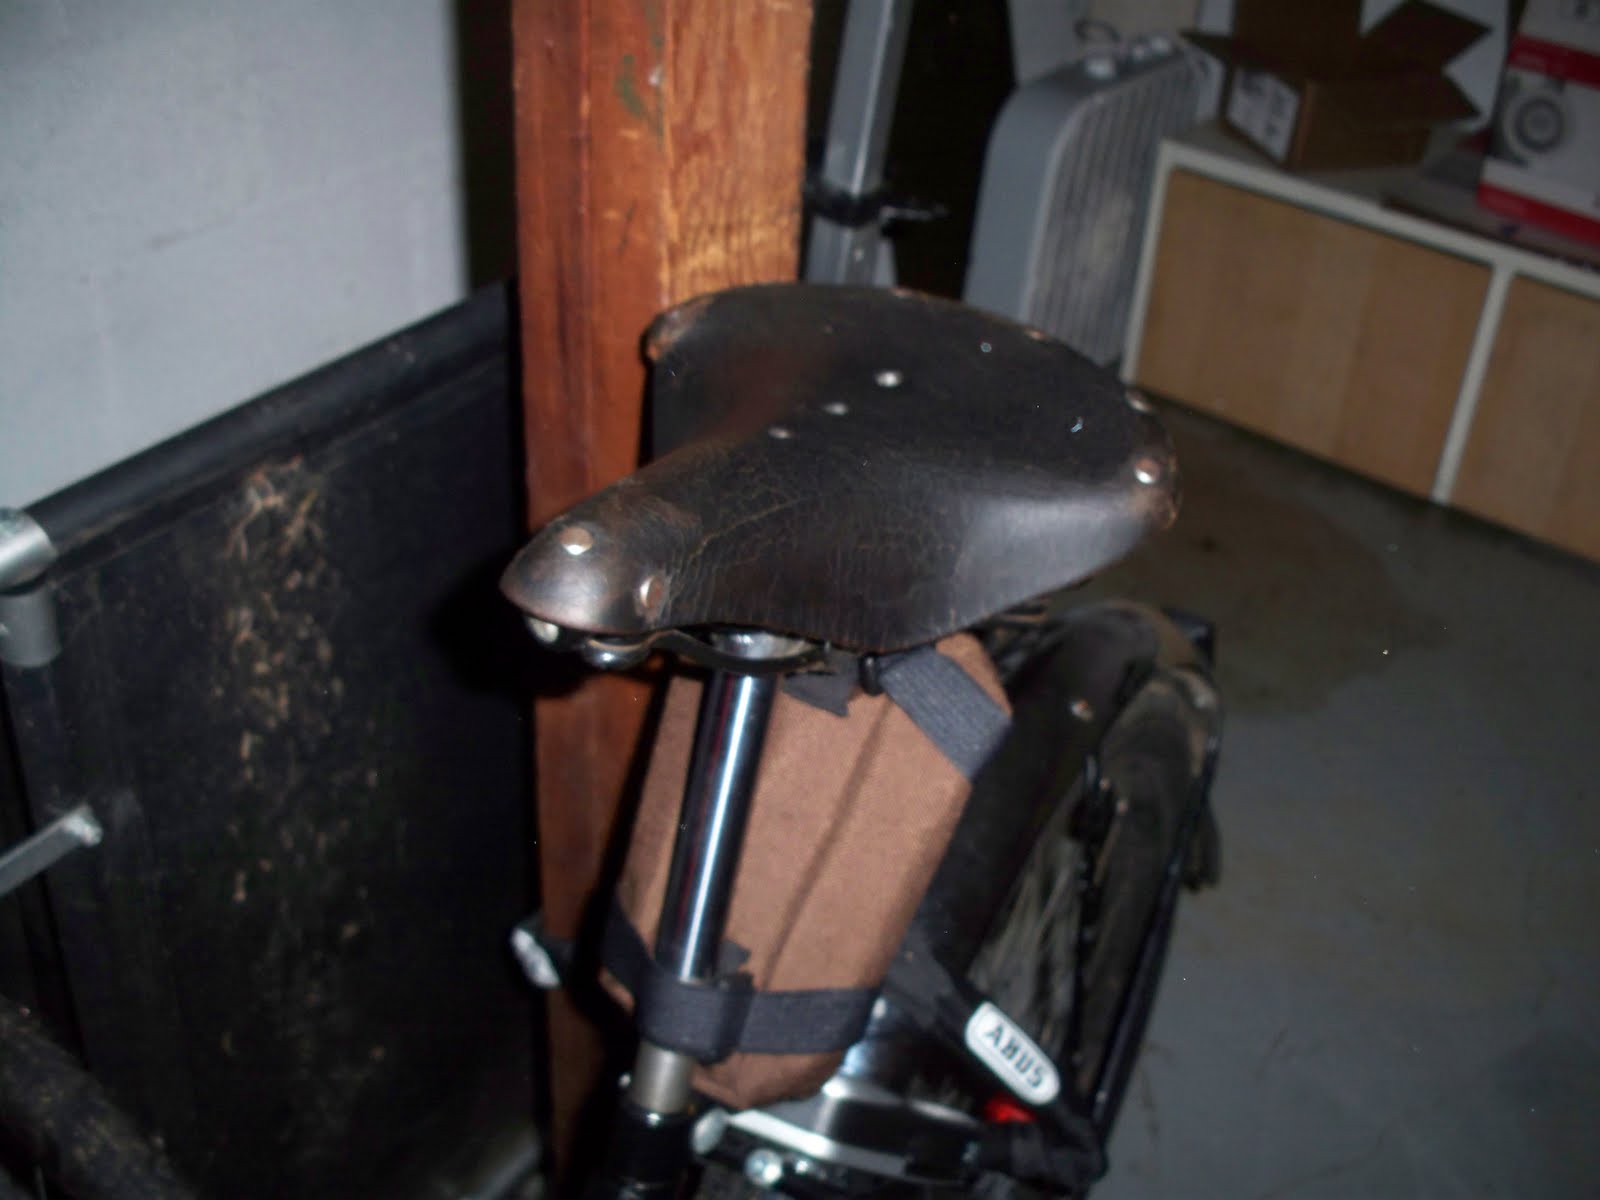 What category should saddles be placed on Craigslist?